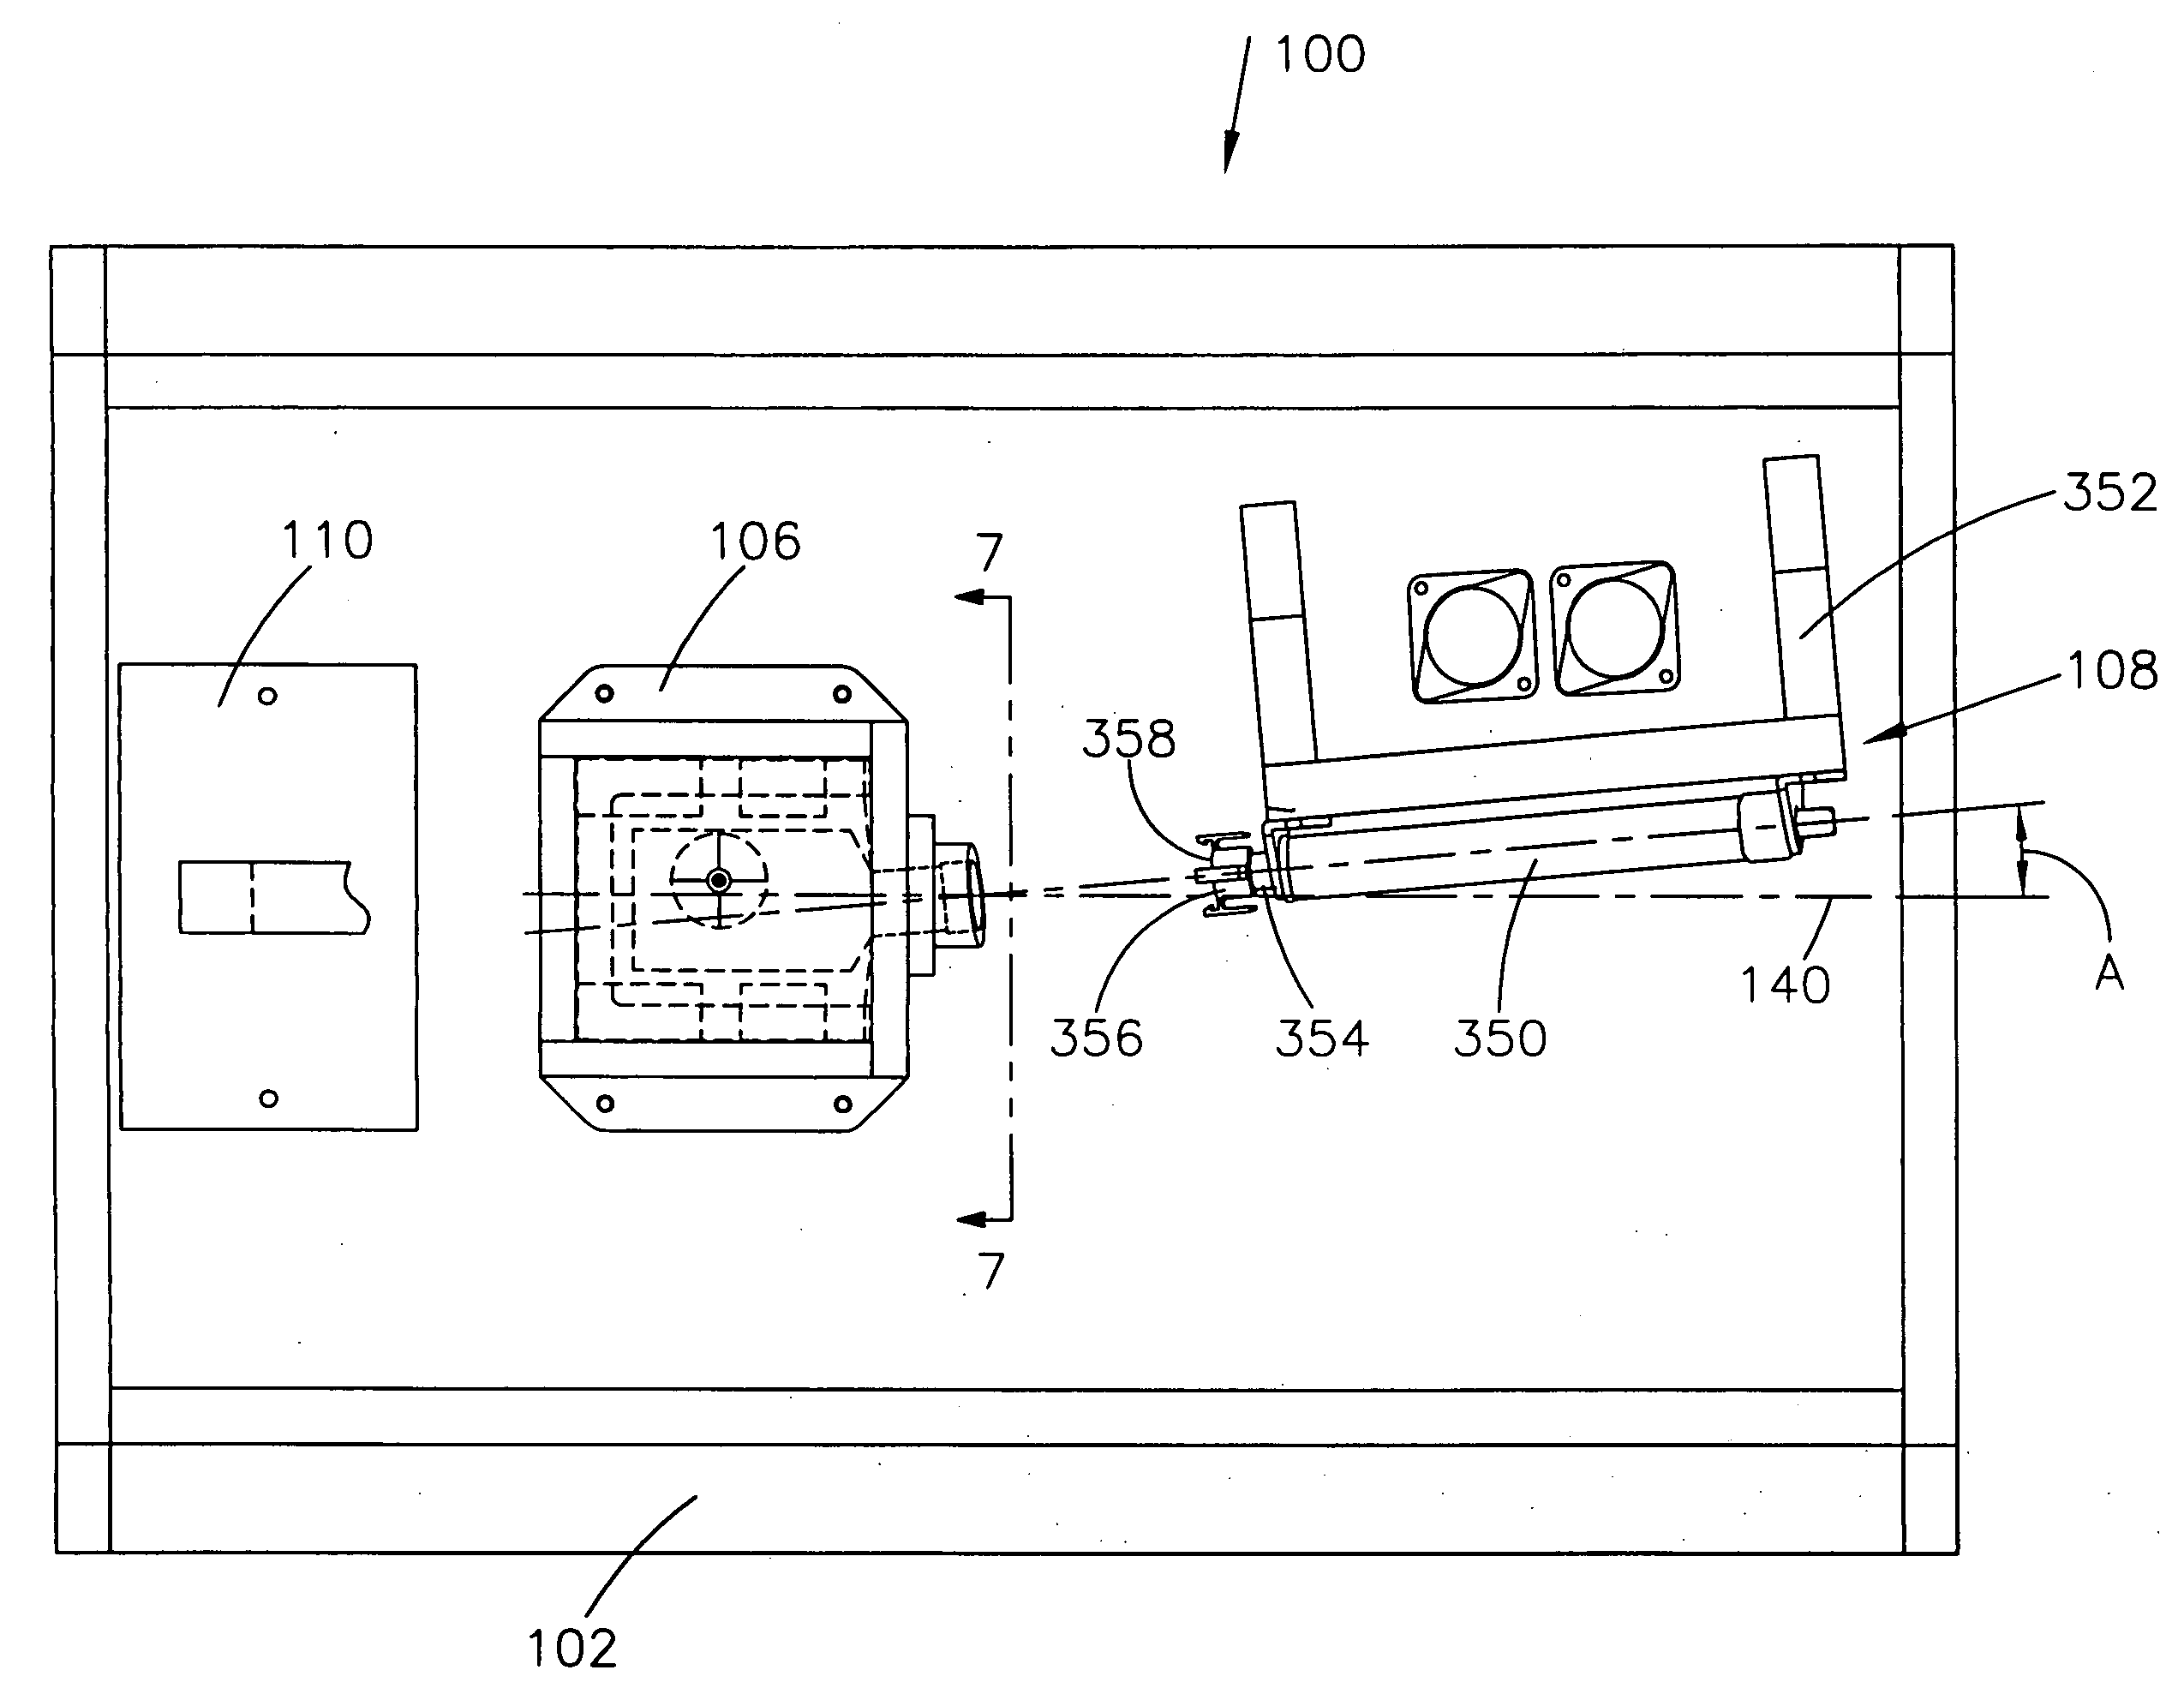 Apparatus for in vitro testing of tampon-and-applicator systems